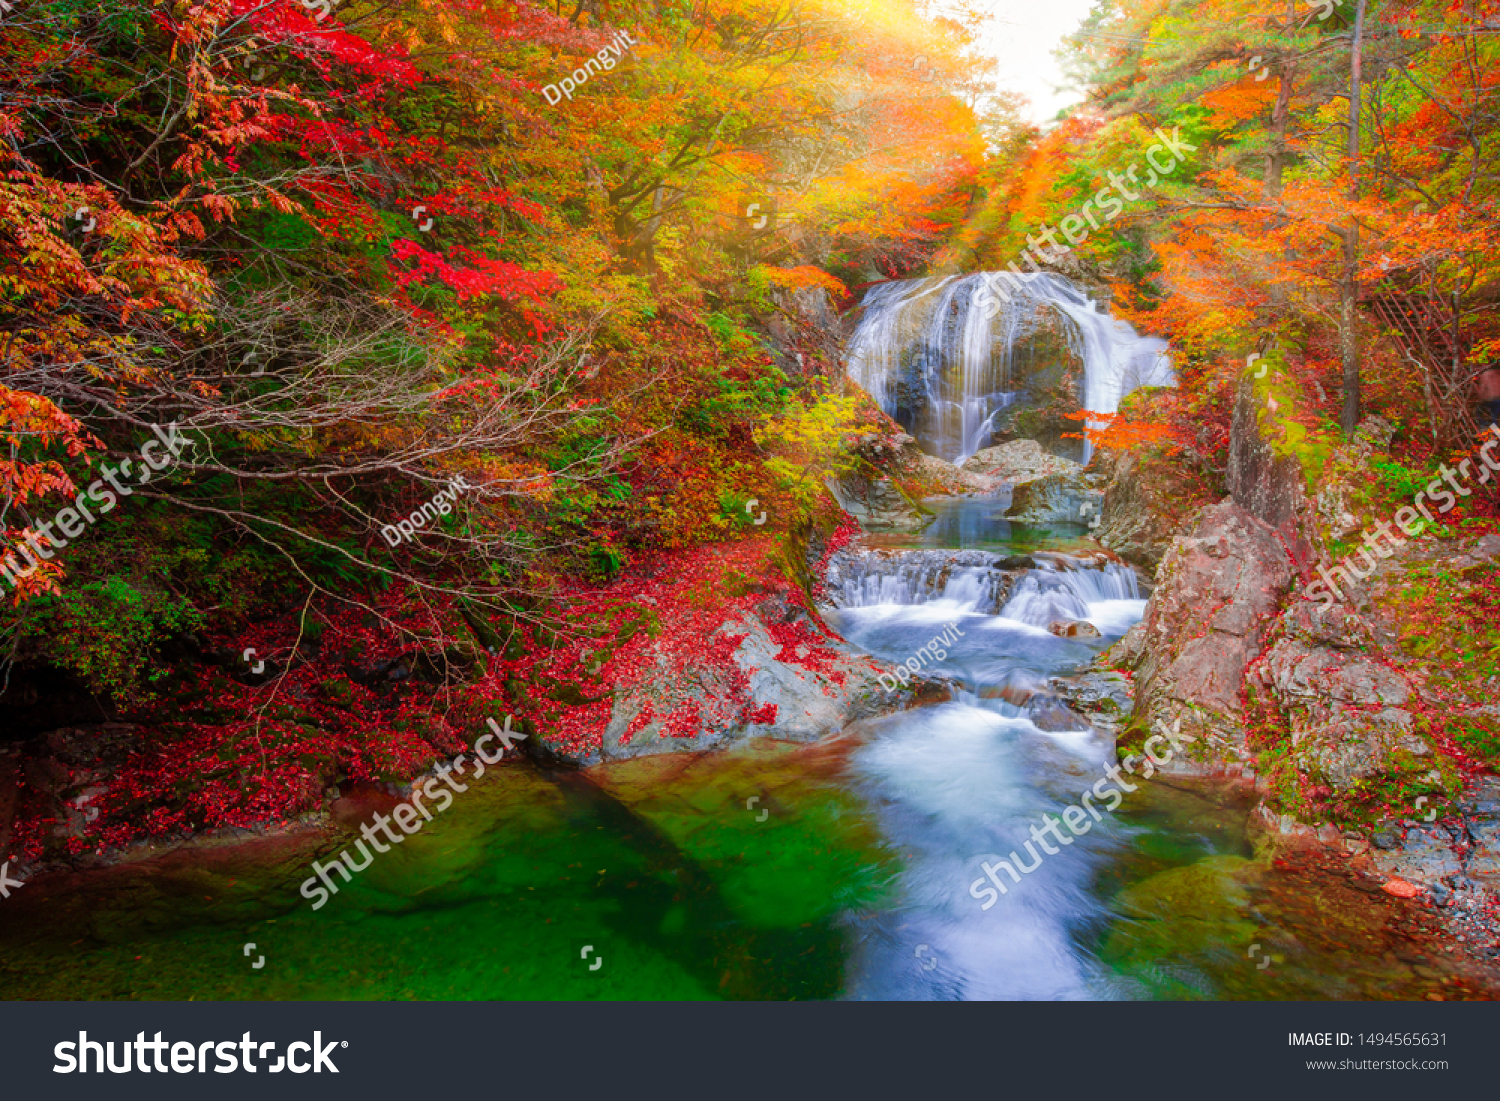 Japanese Hot Springs Onsen Natural Bath Surrounded by red-yellow leaves. In fall leaves fall in Yamagata. Japan. Waterfall among many foliage, In the fall leaves Leaf color change  #1494565631